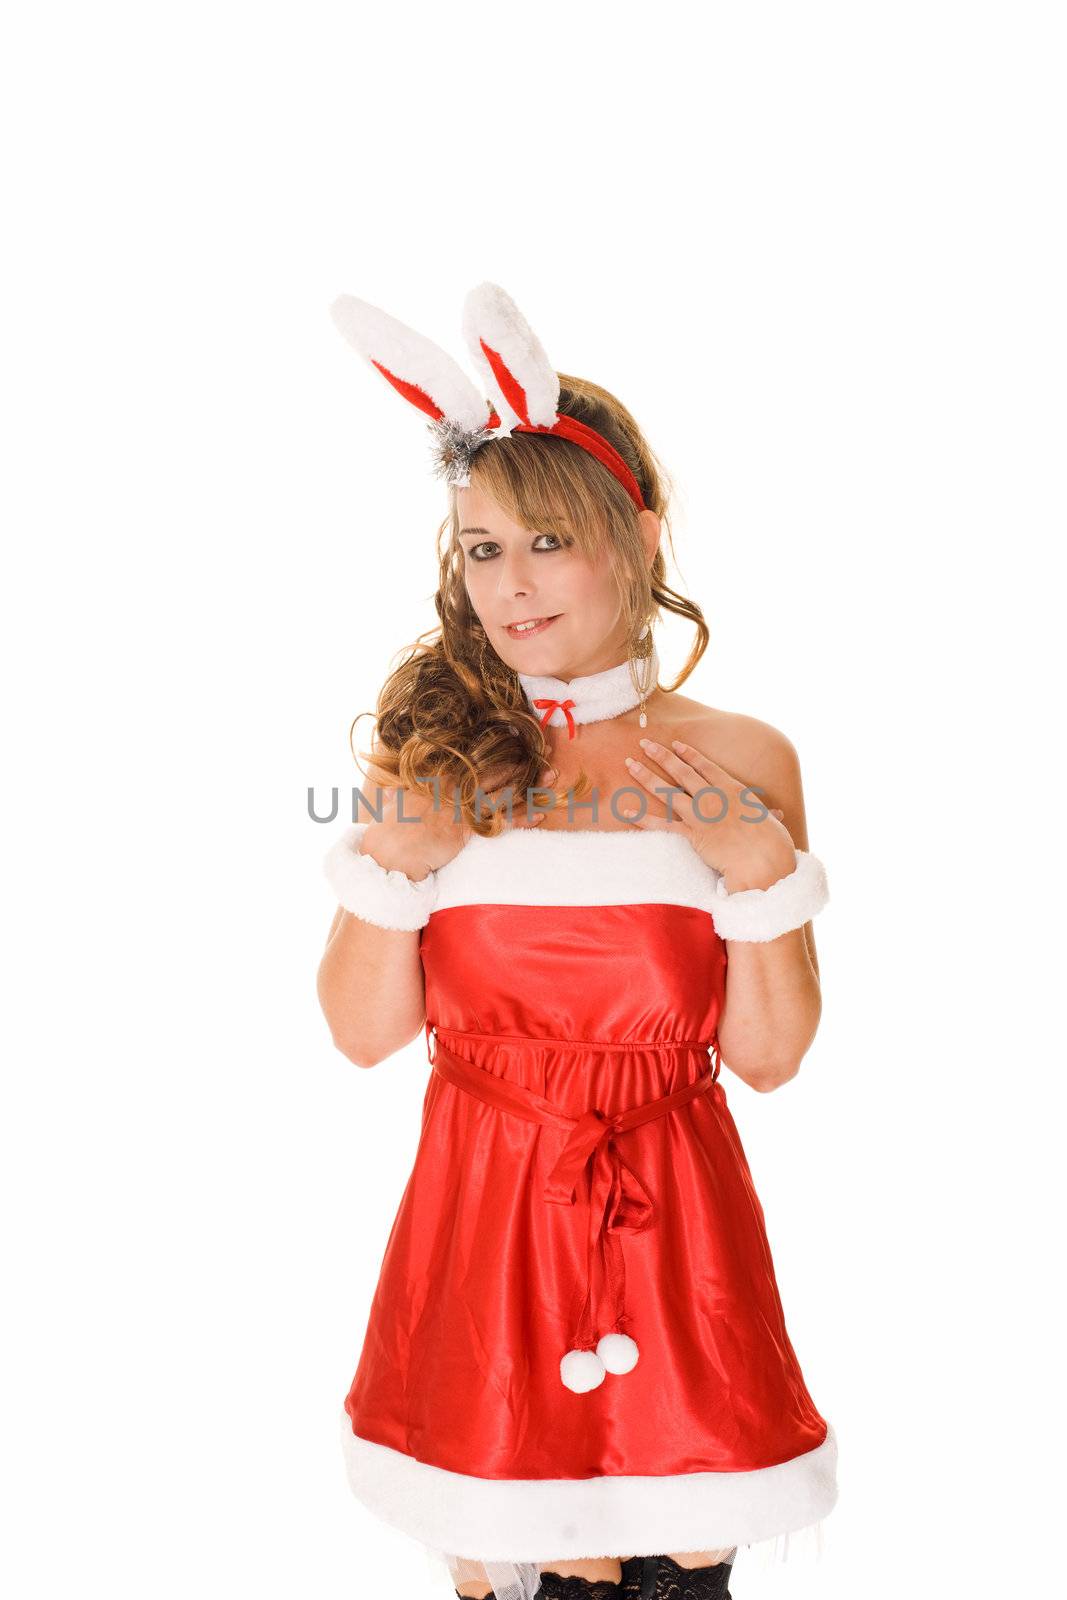 Studio portrait  of attractive woman in a christmas outfit